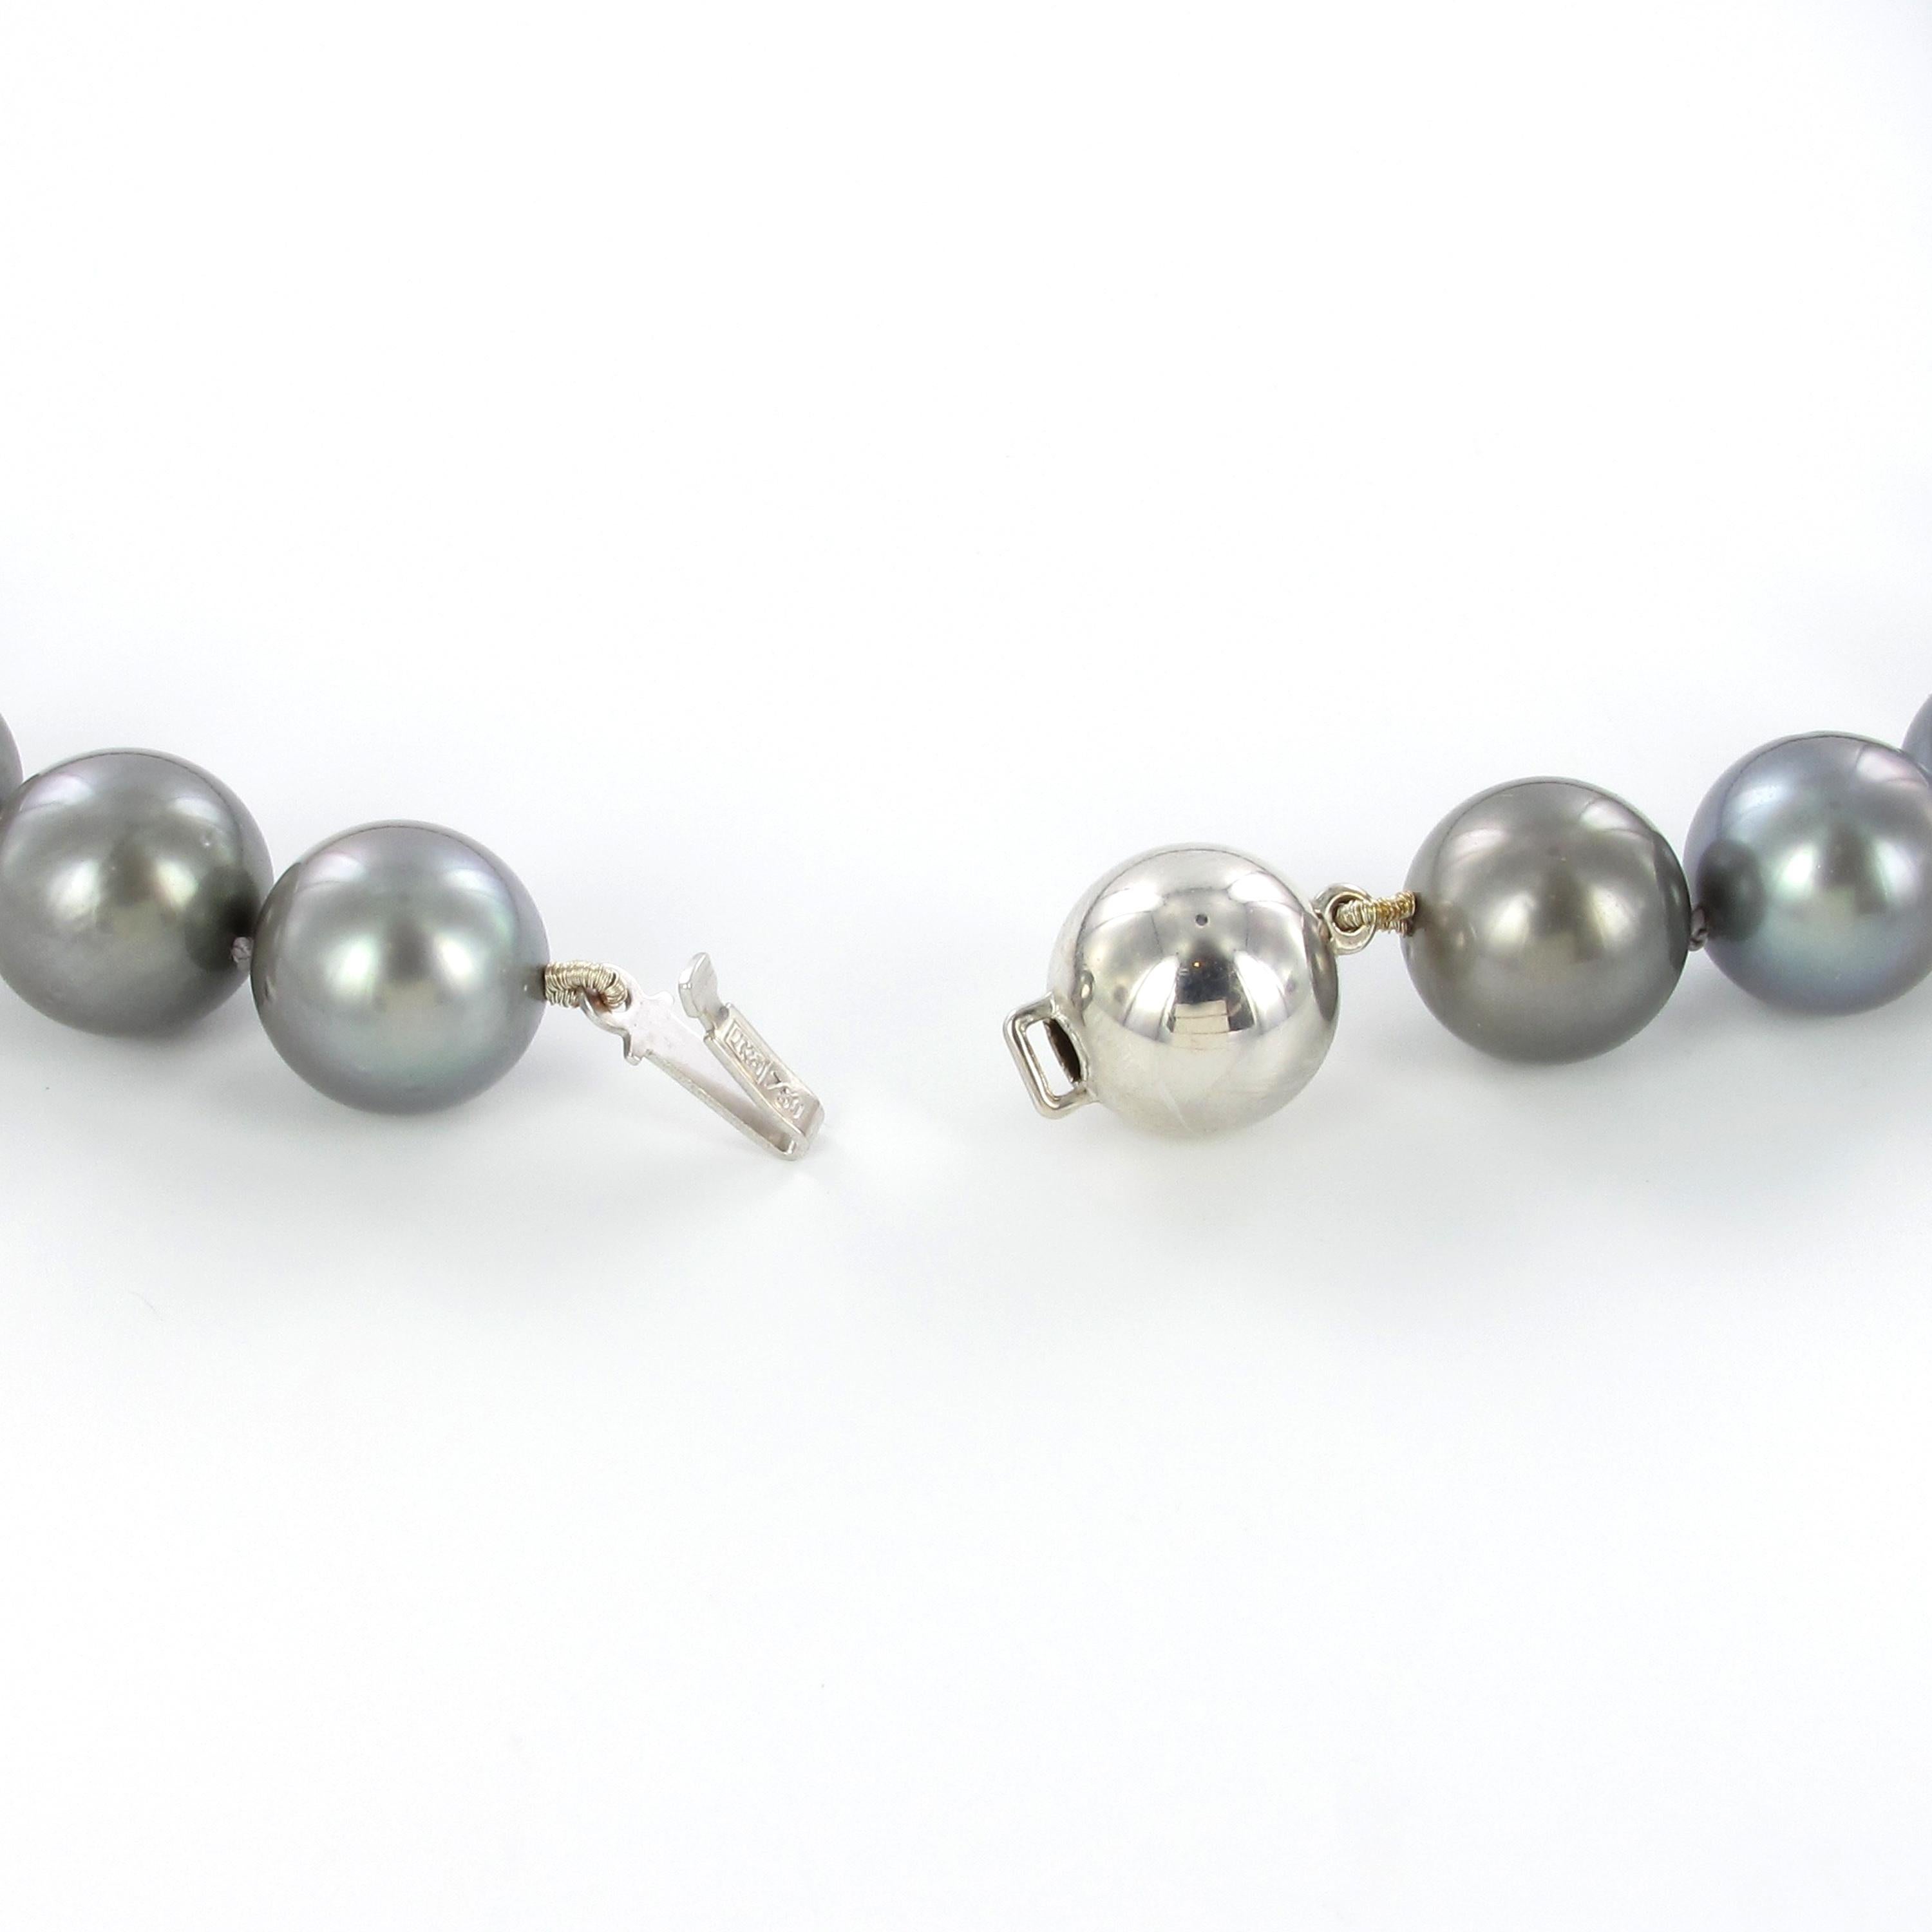 Tahitian Cultured Pearl Necklace with White Gold Clasp In Excellent Condition For Sale In Lucerne, CH